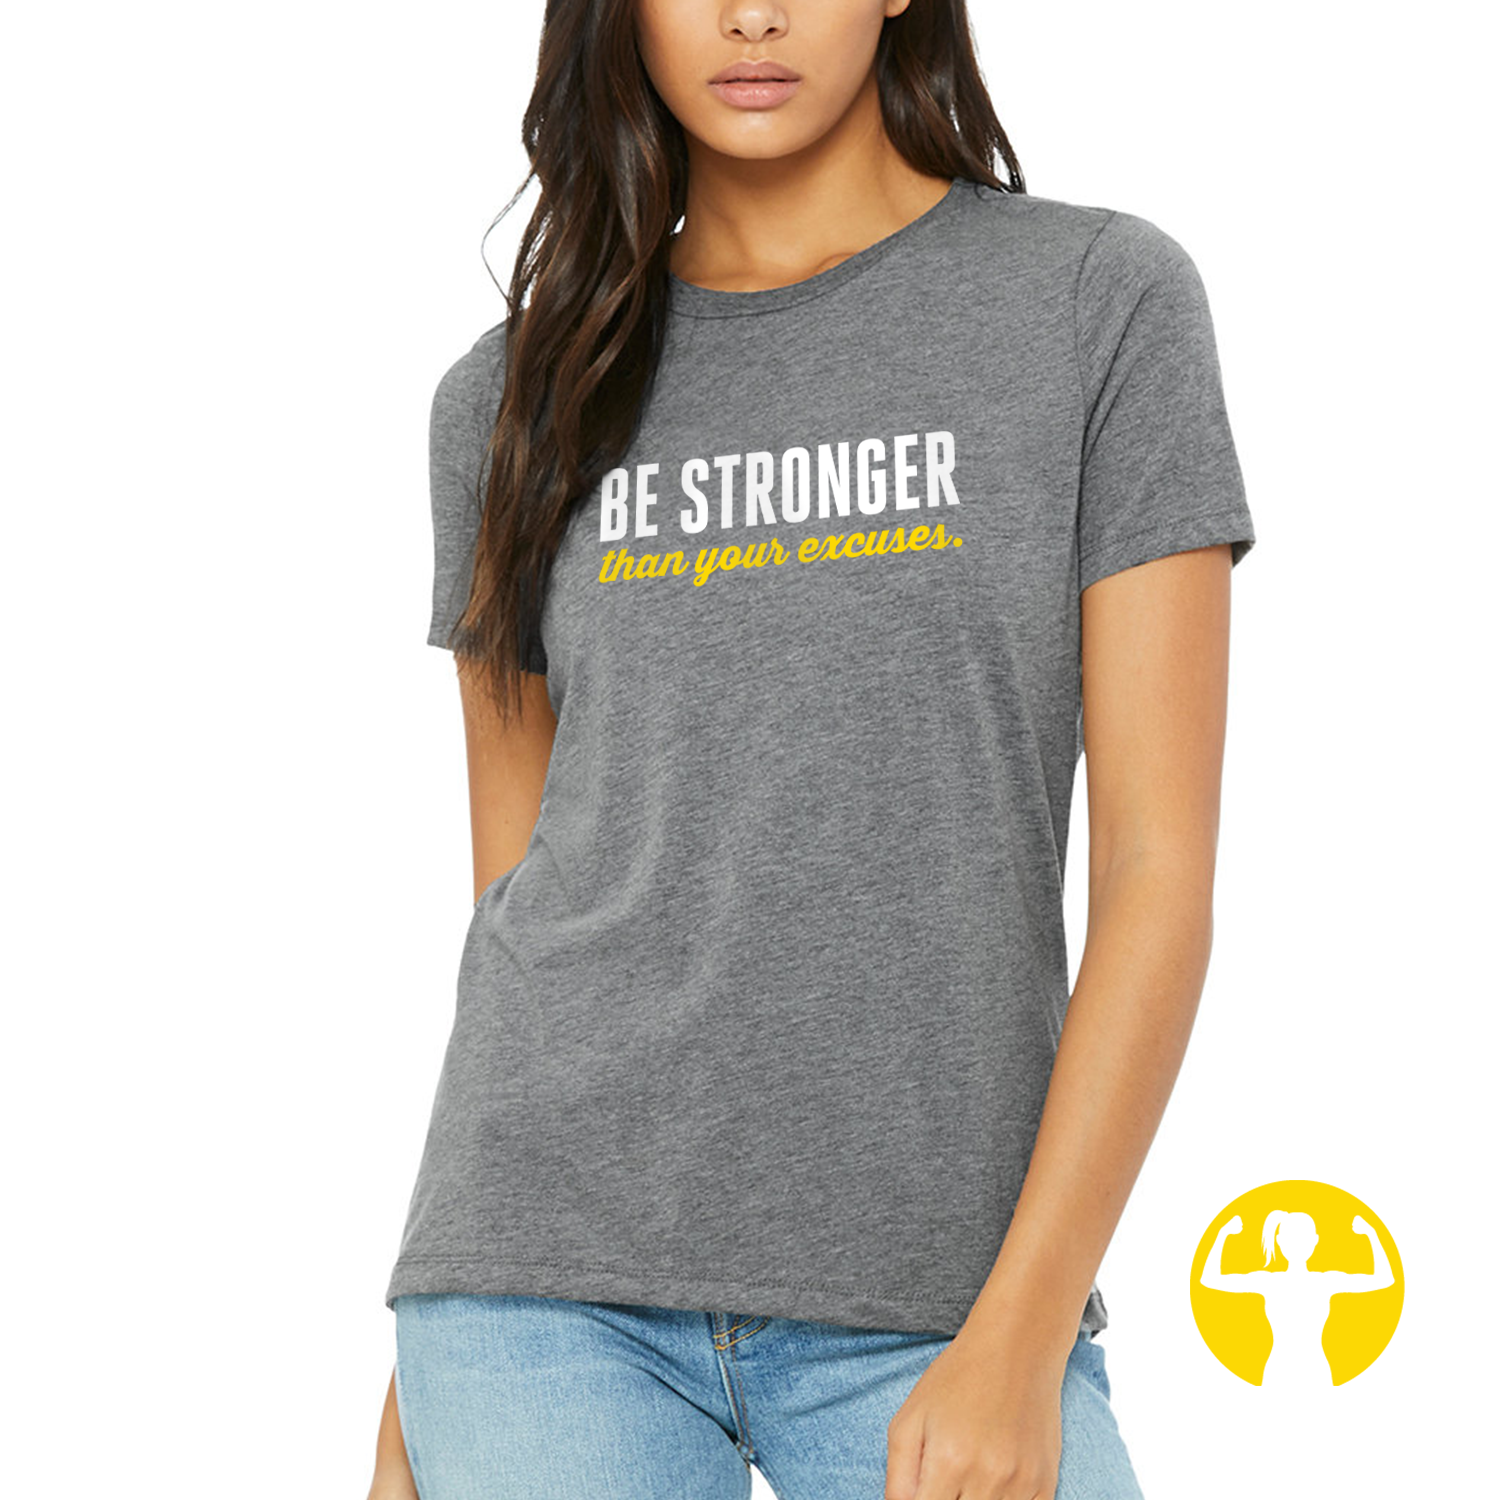 Be Stronger Than Your Excuses, Relaxed Triblend T-Shirt